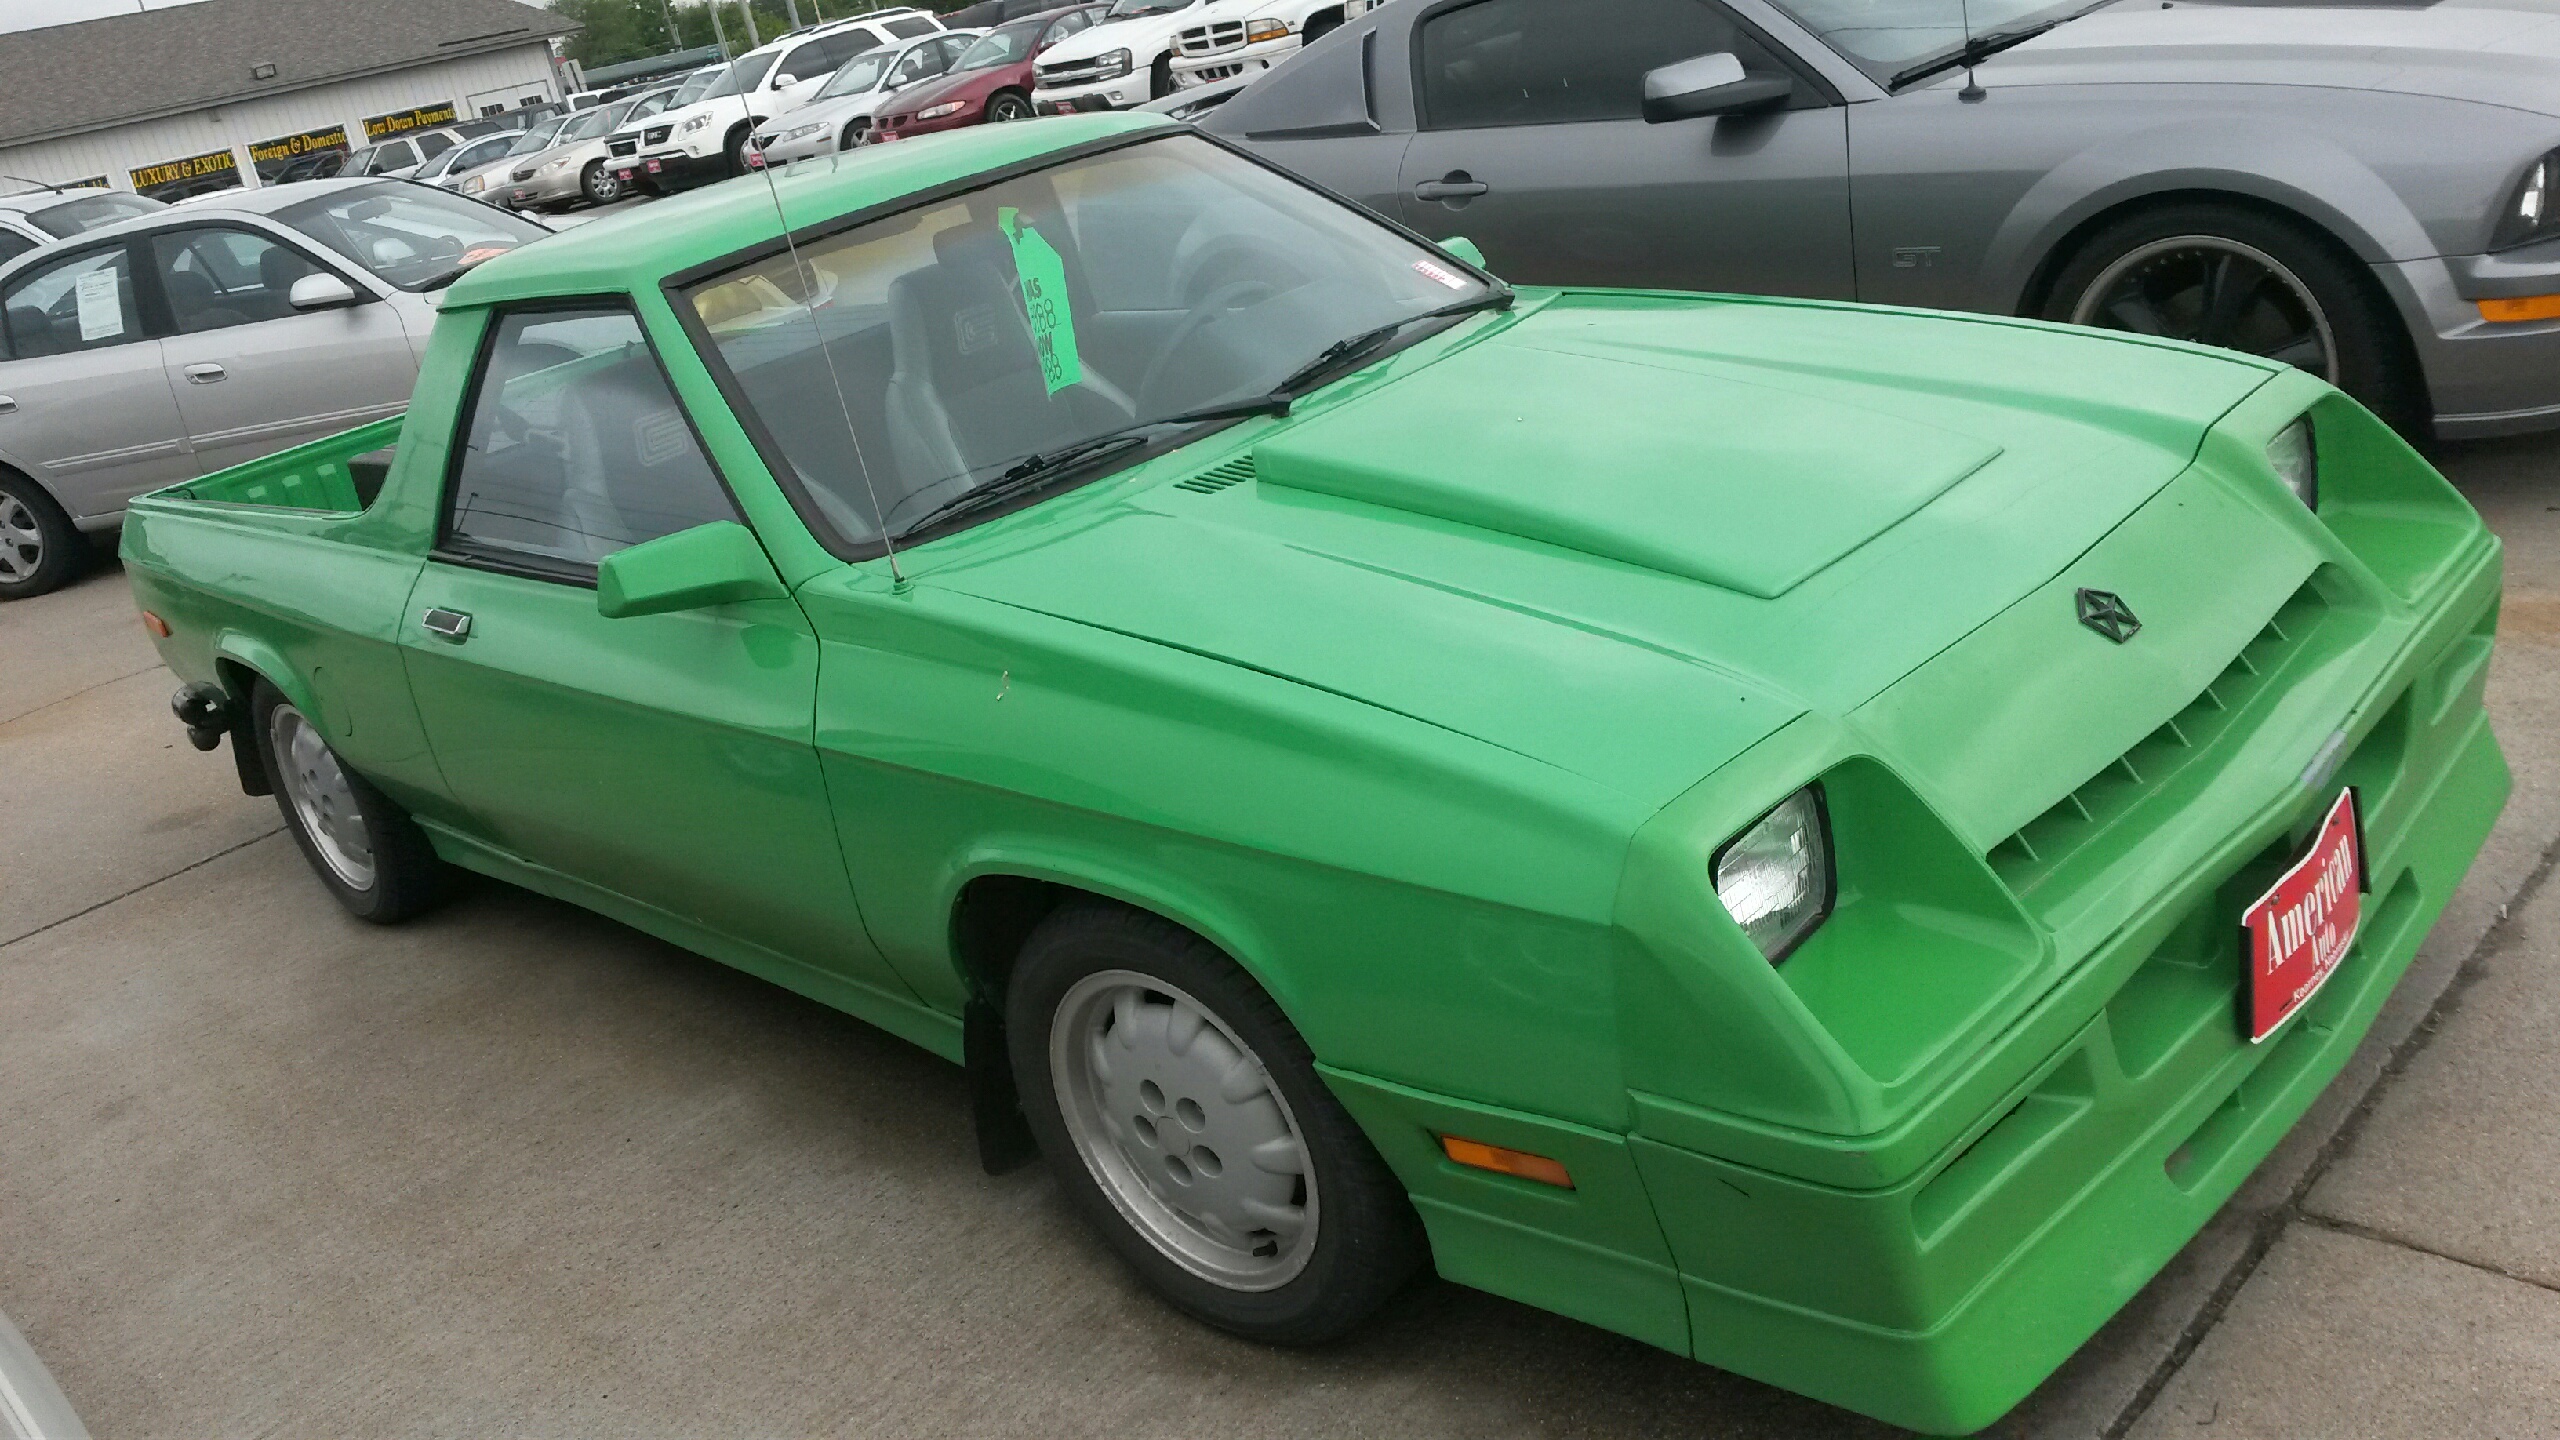 Used Car Lot Find: How Often Will You Find A Sassy Grass Green Dodge Rampage That’s This Nice?